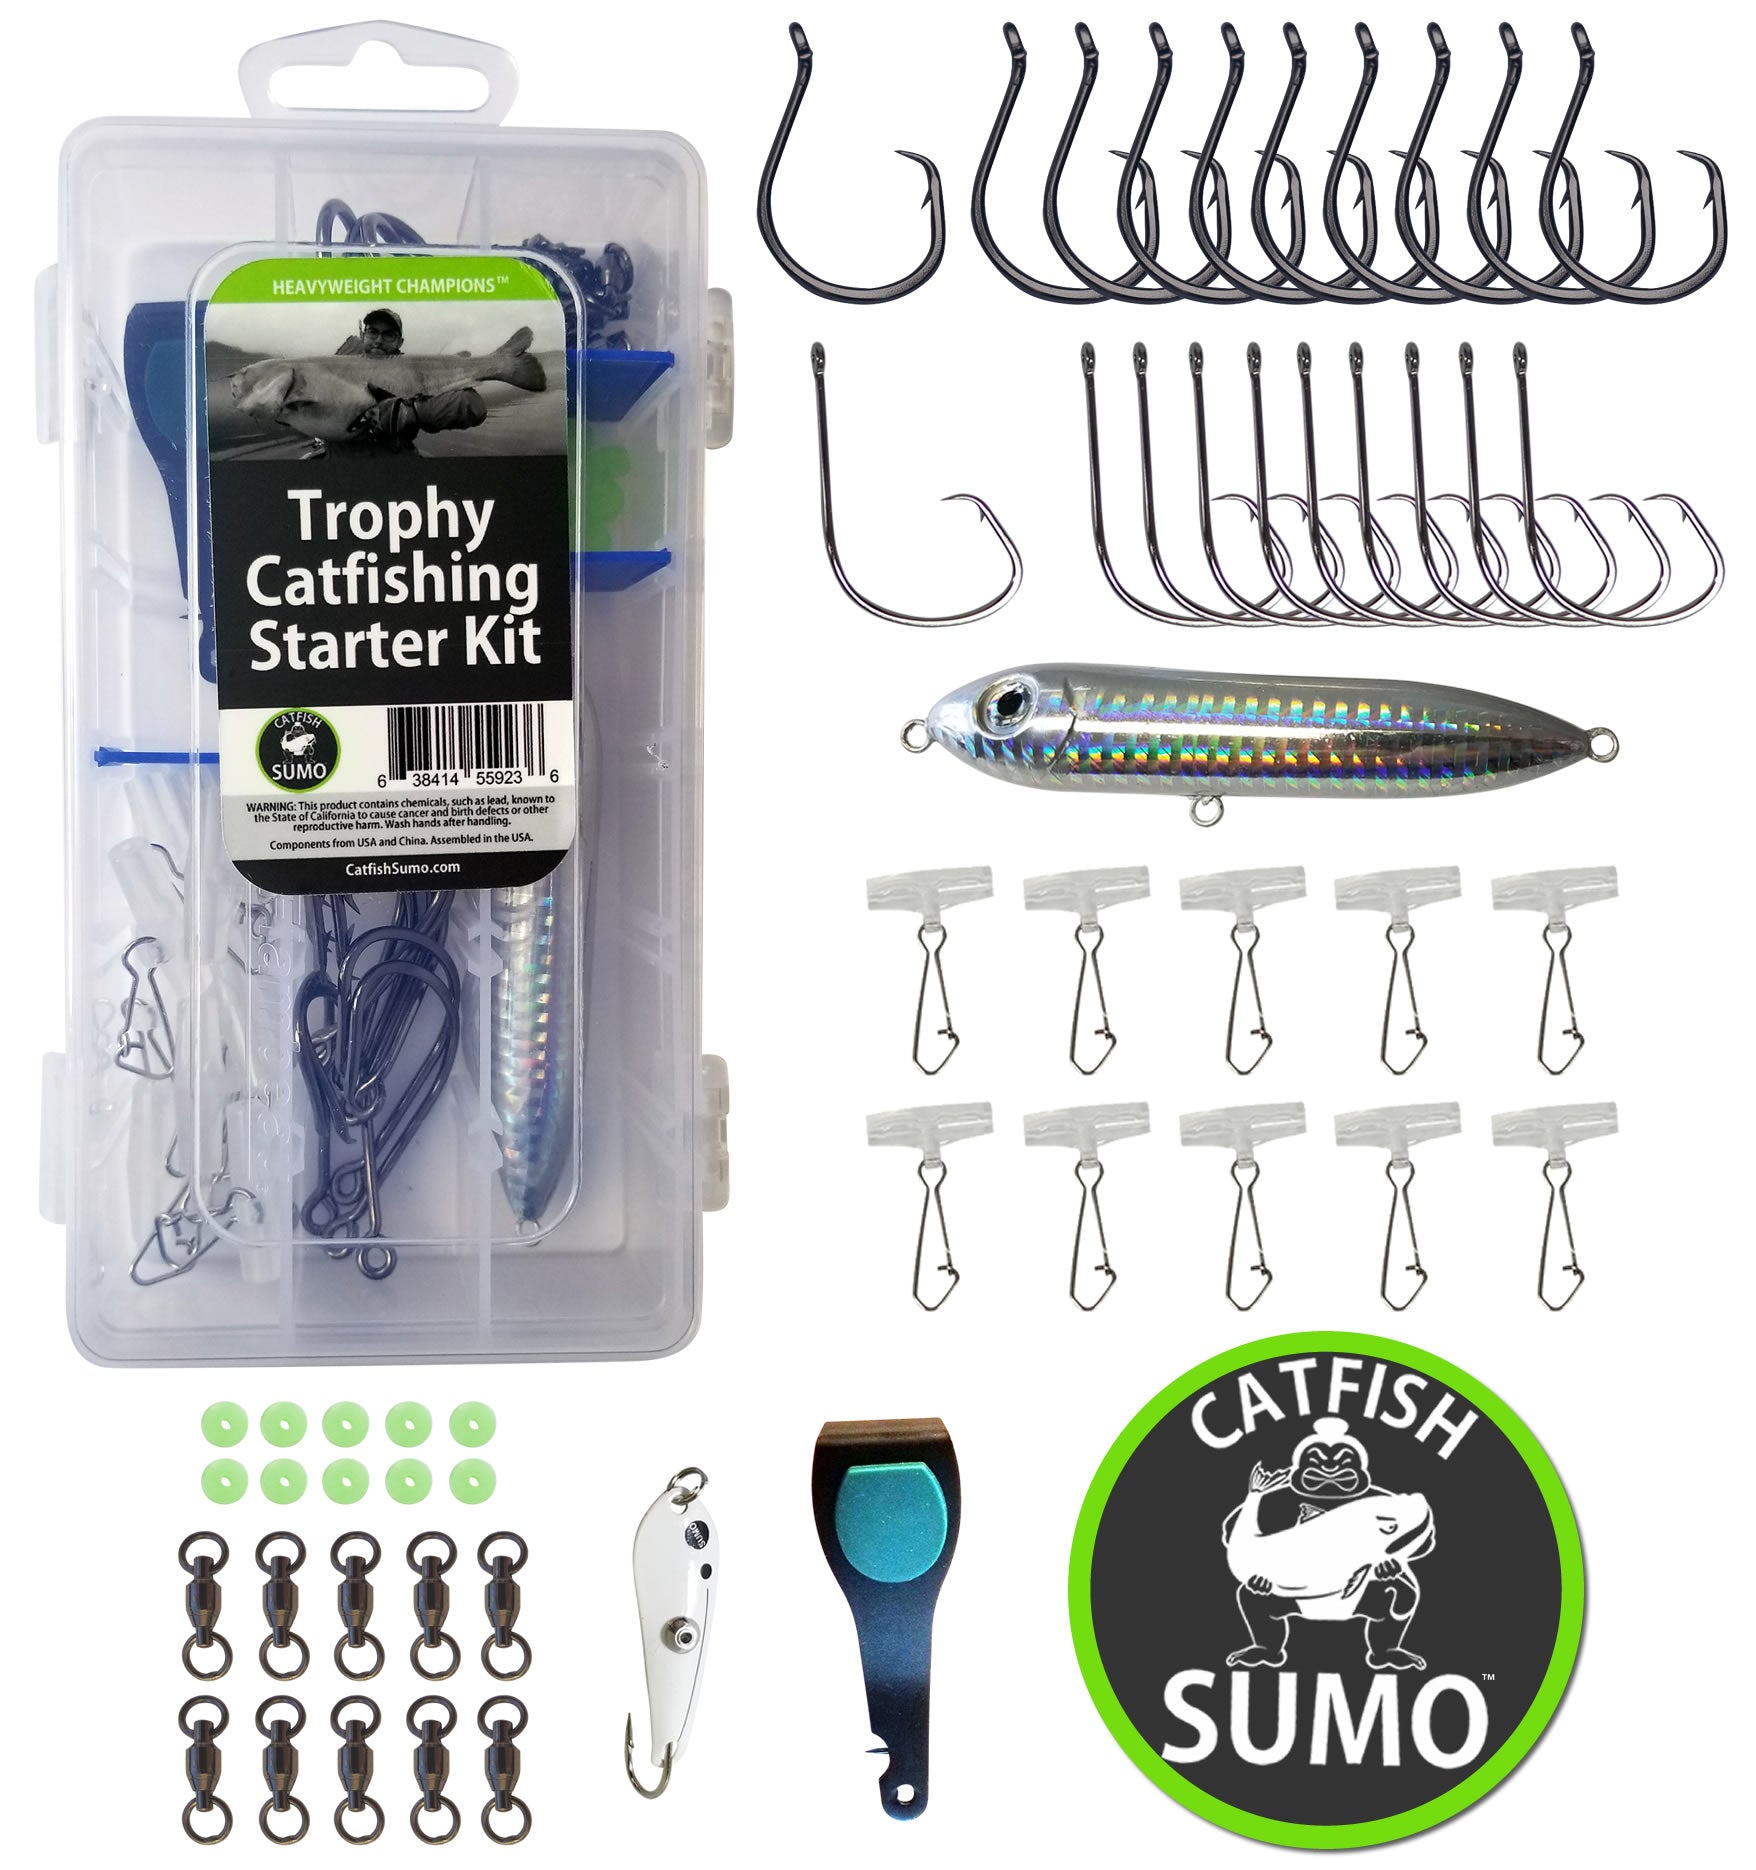 Complete Trophy Catfishing Starter Kit - 55 Pieces for Catching Your First  Trophy Catfish